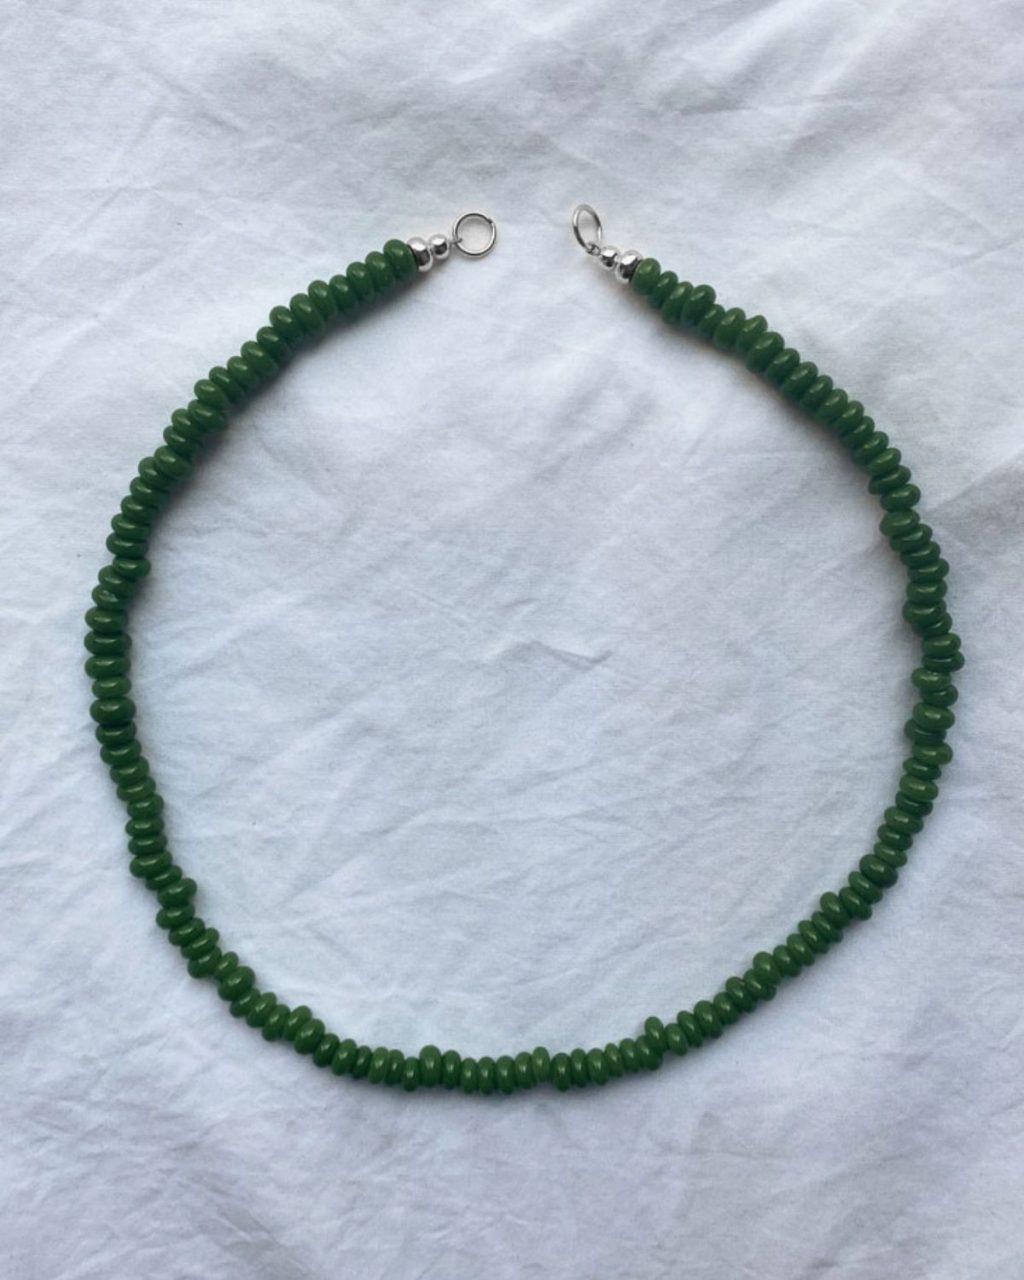 Green recycled glass beads necklace